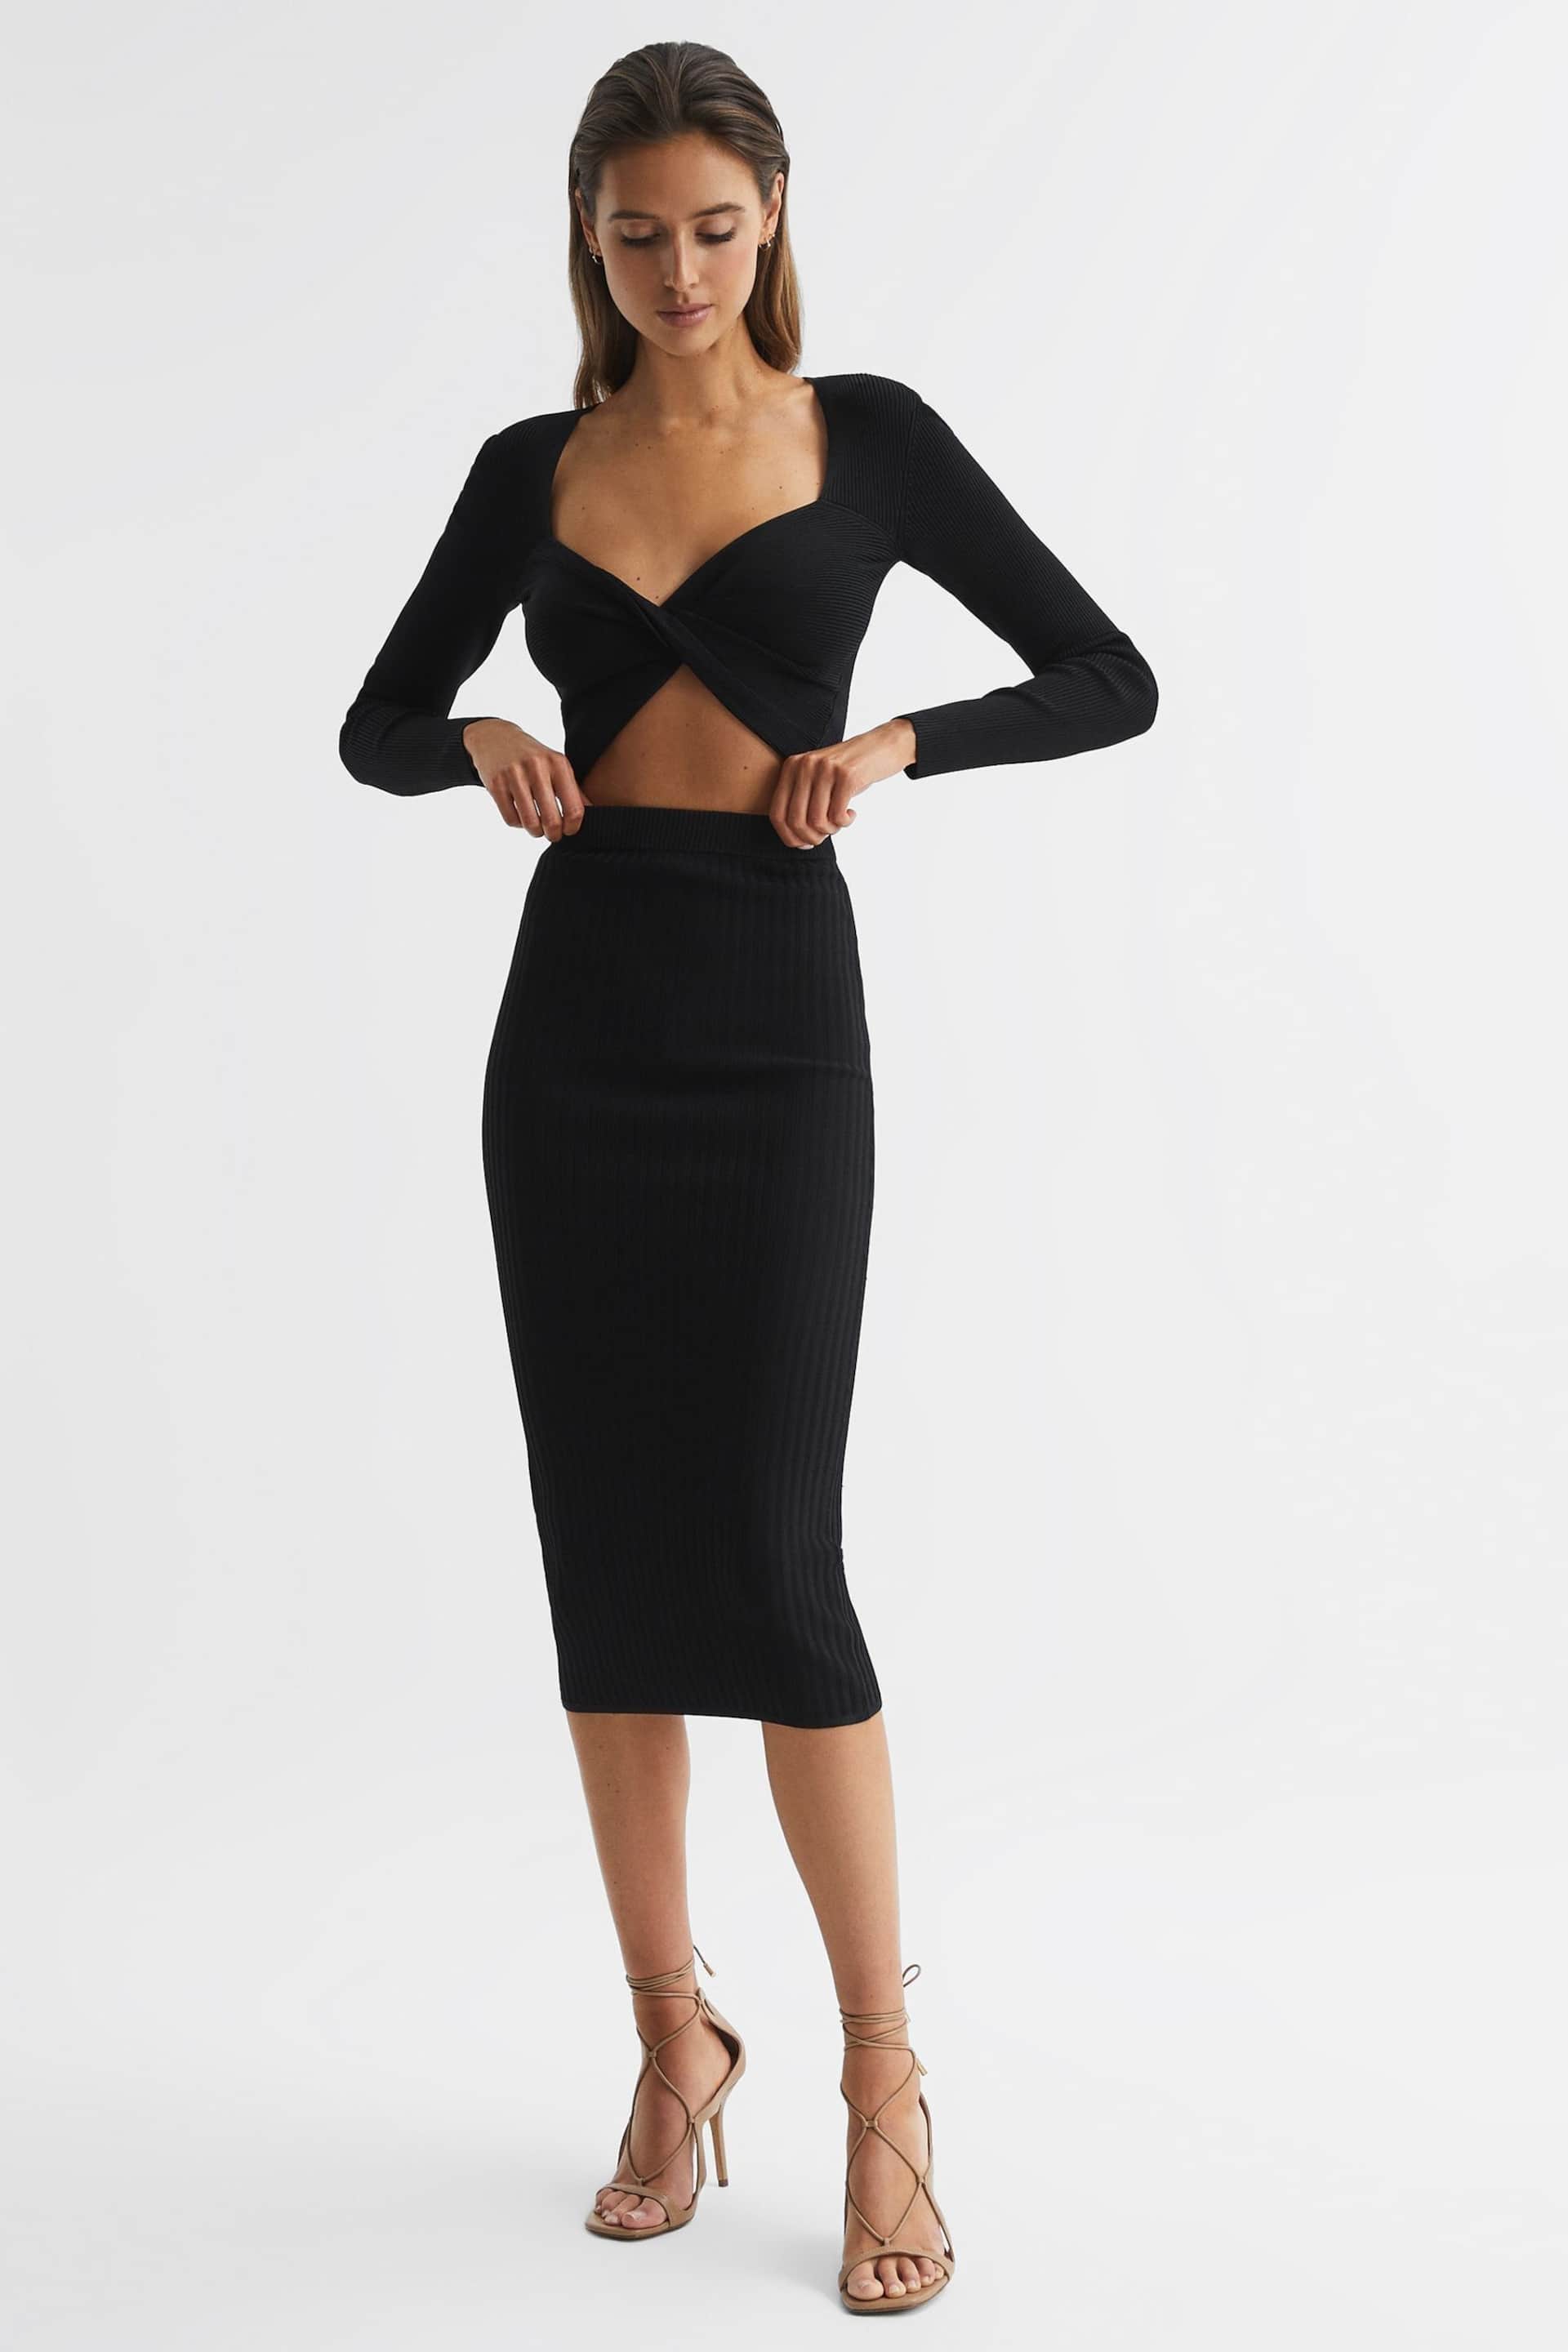 Reiss Black Iona Knitted Pencil Skirt Co-Ord - Image 3 of 5